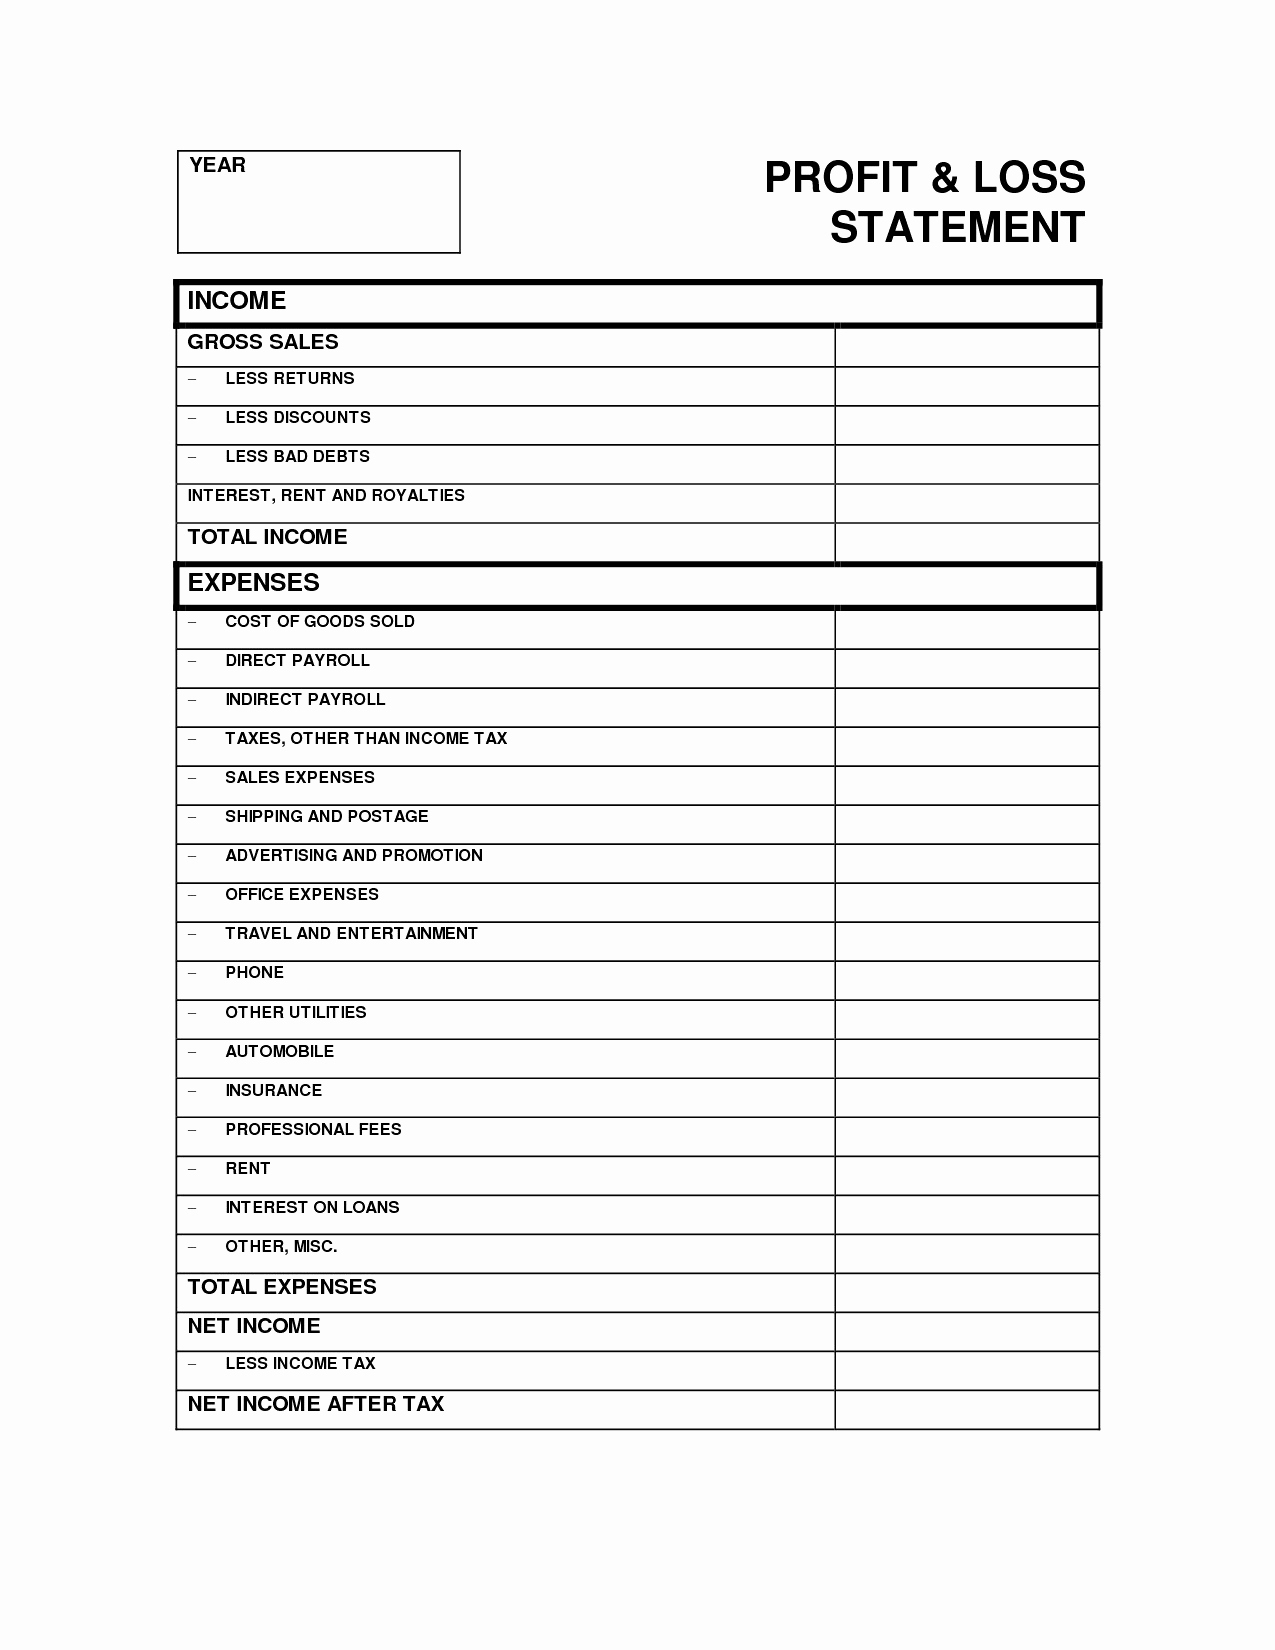 Self Employed Expenses Spreadsheet New Profit And Loss Statement Within Profit And Loss Statement Template For Self Employed Excel